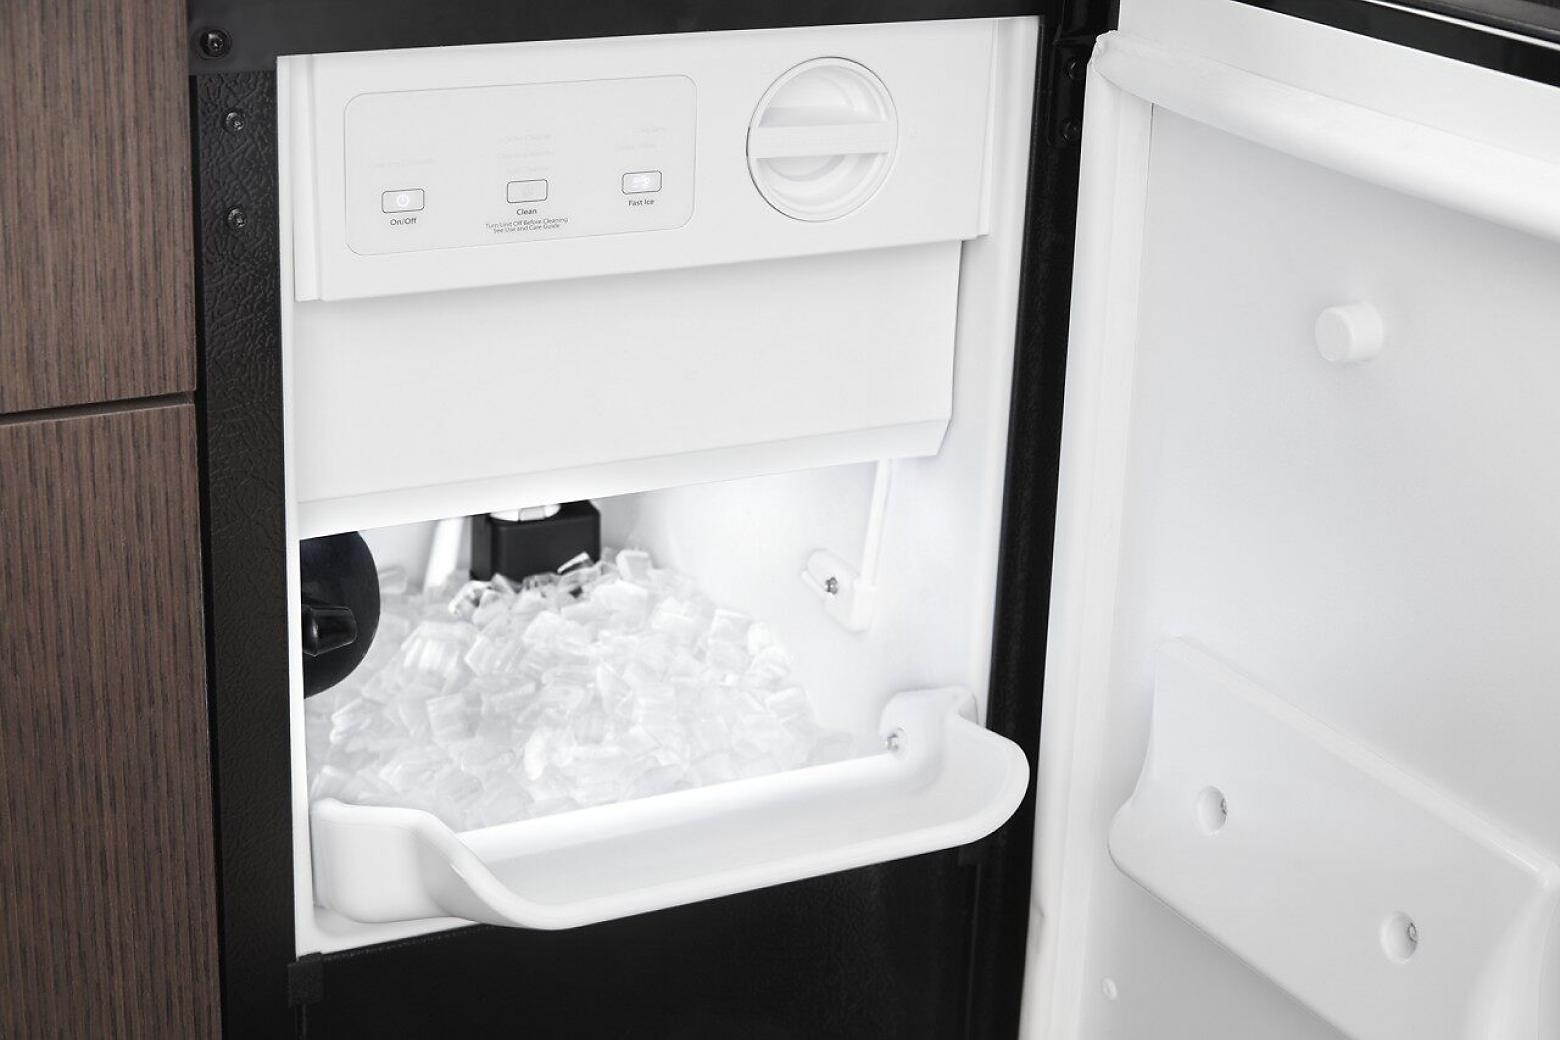 Ice maker on Whirlpool WRX735SDHZ gives out half crushed ice when set to  cubes. Also the ice chute clogs every few days and I have to stick  something up the dispenser to